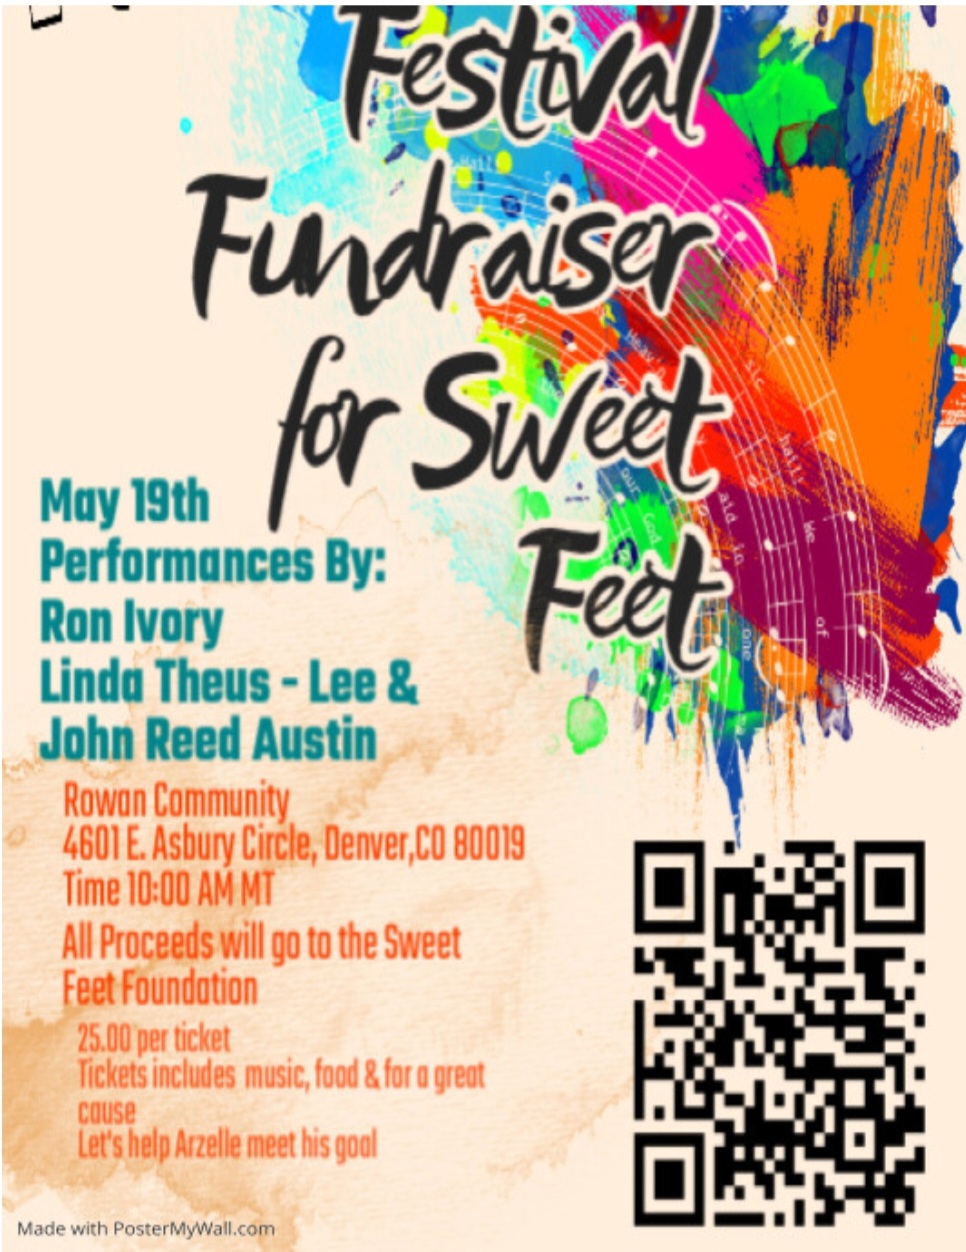 You are currently viewing Rowan Community Health Fundraiser for “Sweet Feet Foundation” (Performances by Ron Ivory, Linda Theus-Lee & John Reed Austin)